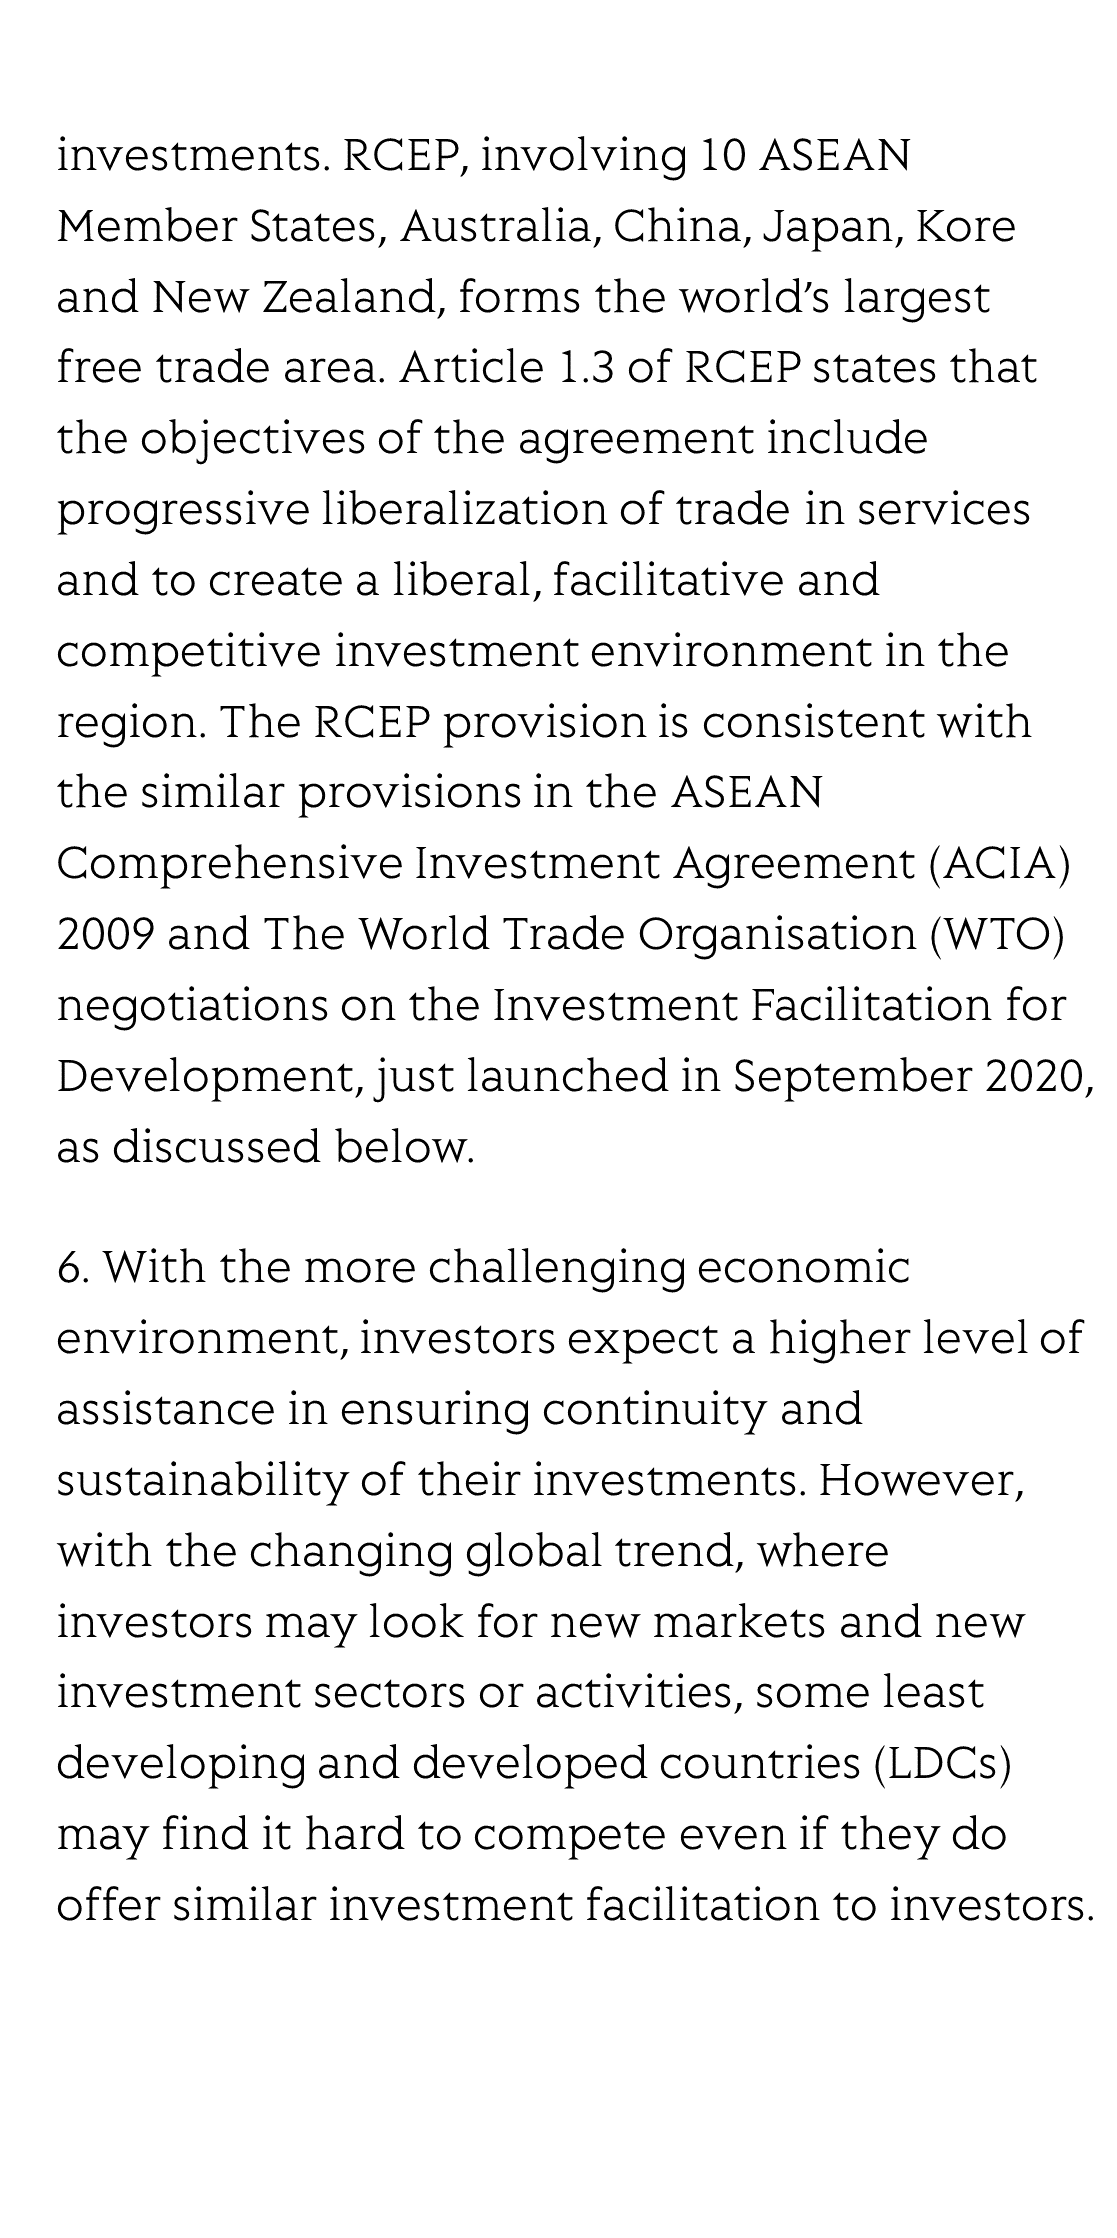 The COVID-19 Pandemic, Regional Cooperation Economic Partnership (RCEP) and the Rise of Investment Facilitation_4